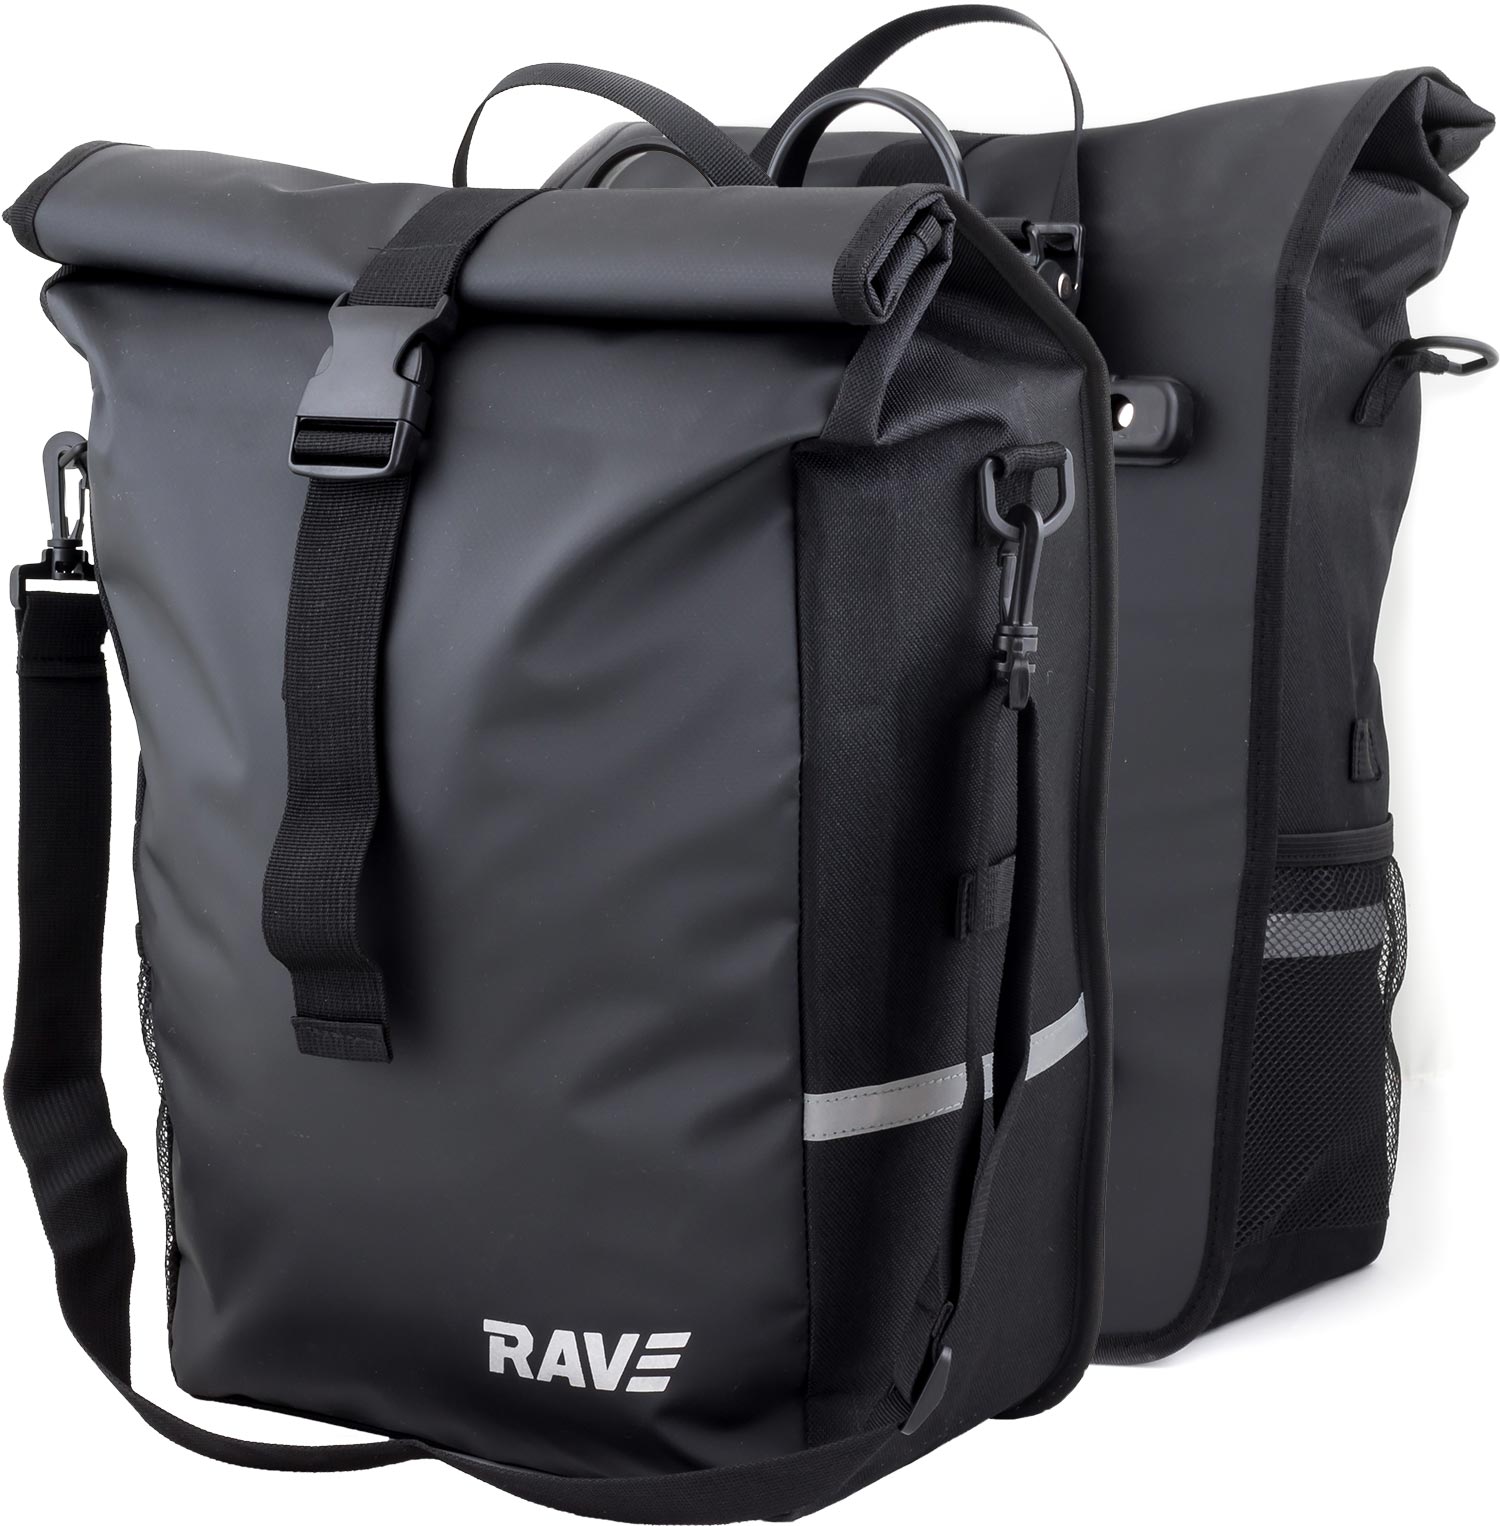 RAVE luggage carrier bag Voyage - (pair) Easy-Click system